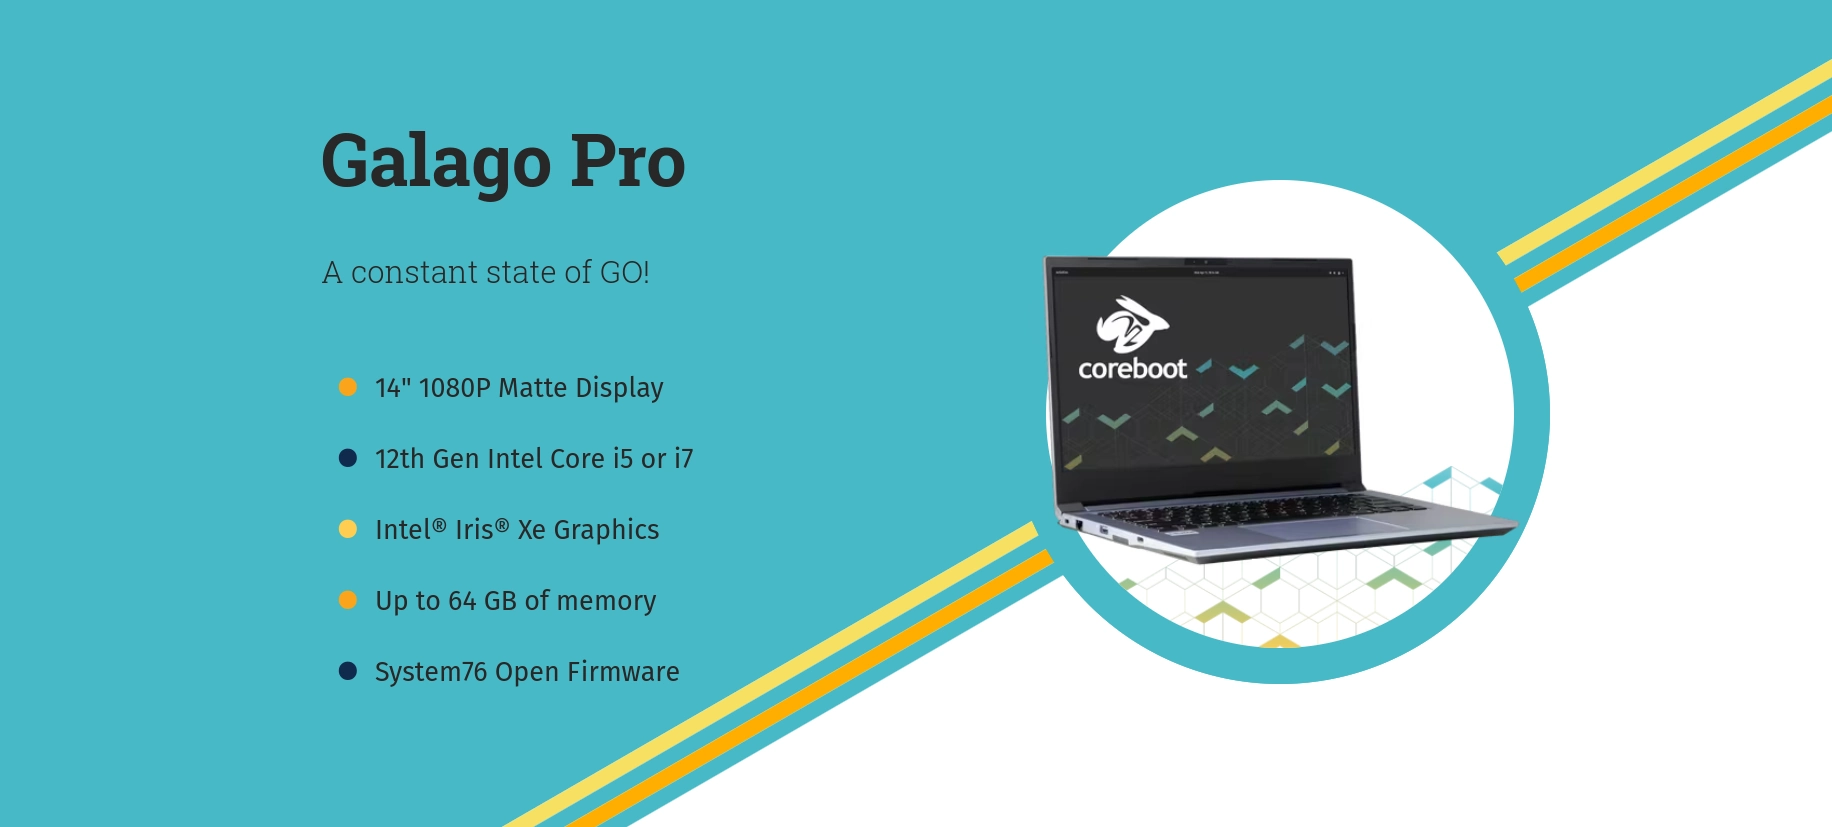 System76 Refreshes Its Affordable Galago Pro Linux Laptop with Alder Lake CPUs